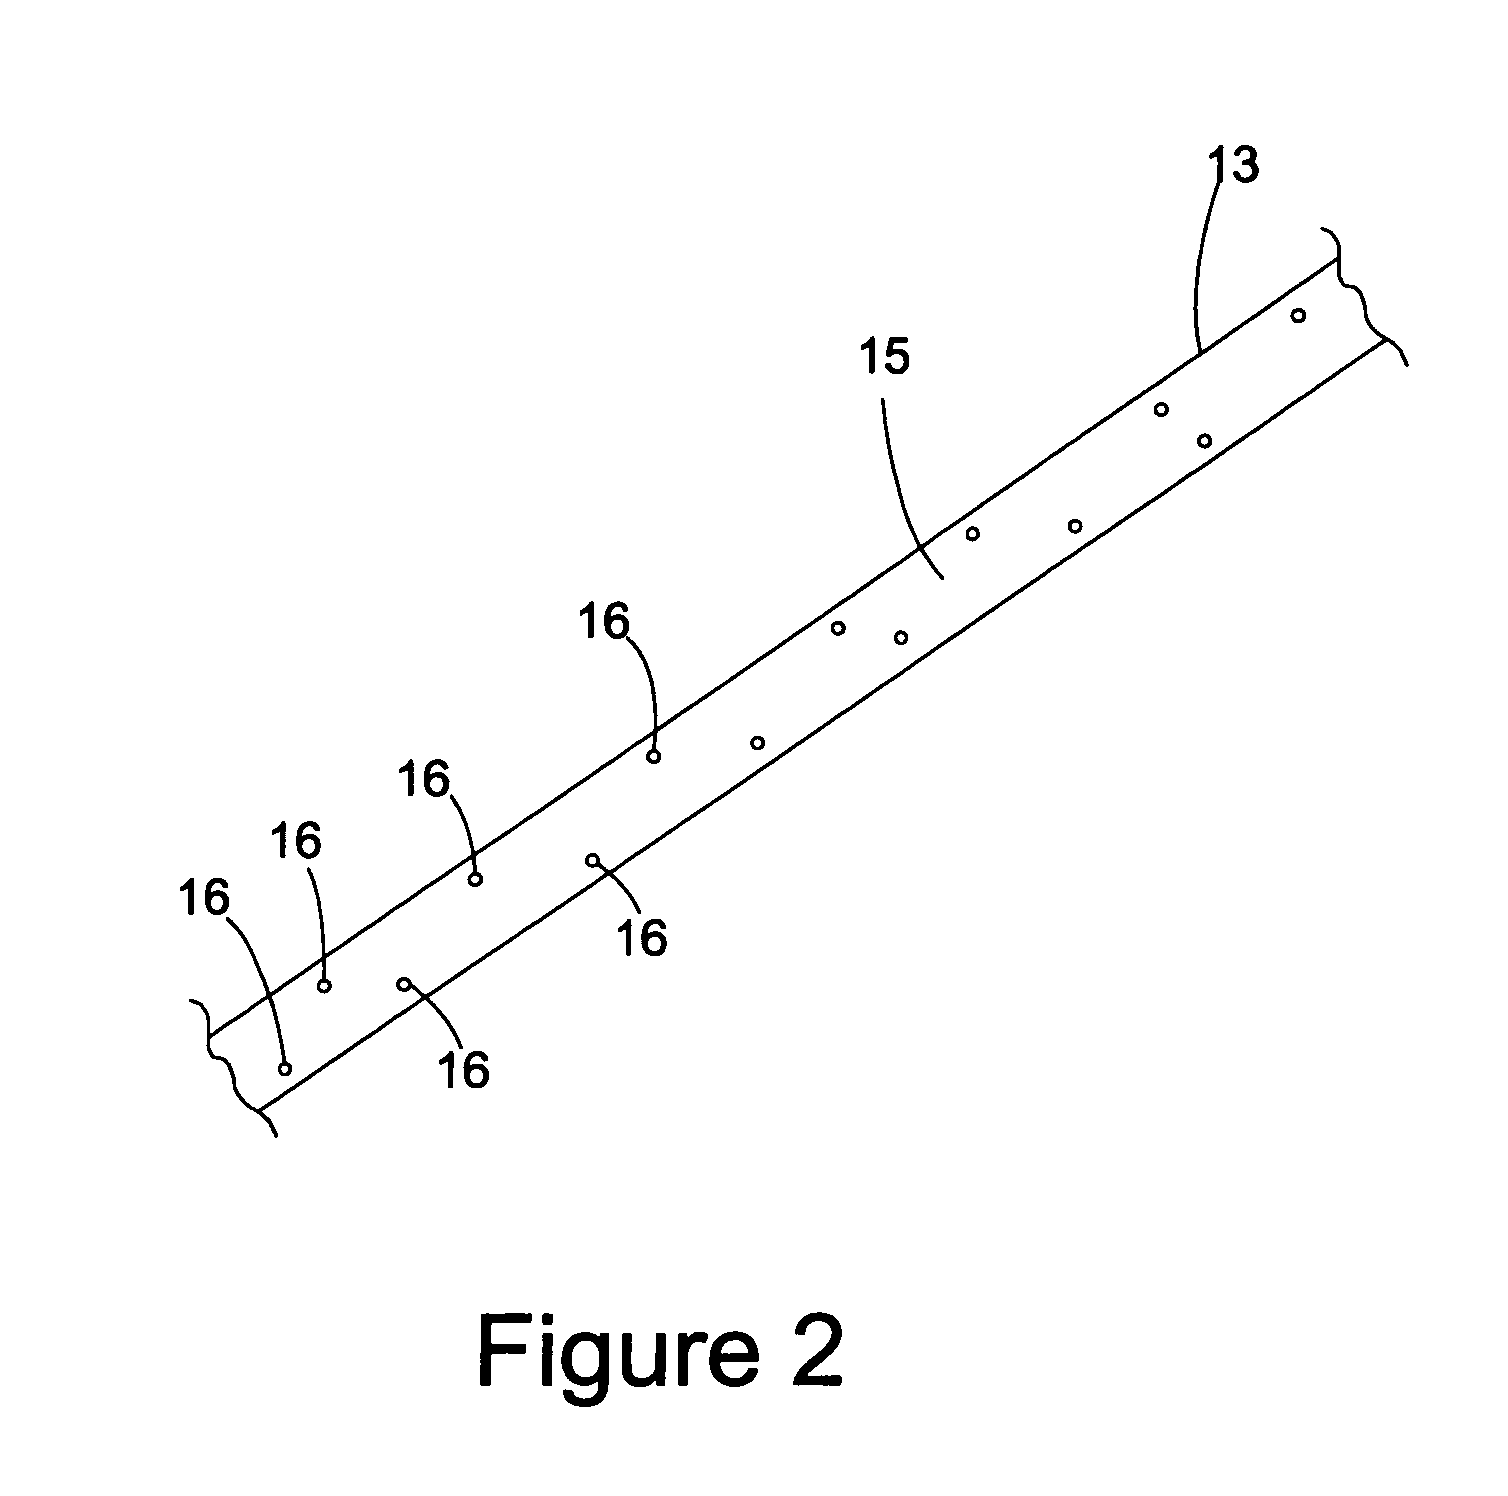 Hollow cathode sputtering apparatus and related method